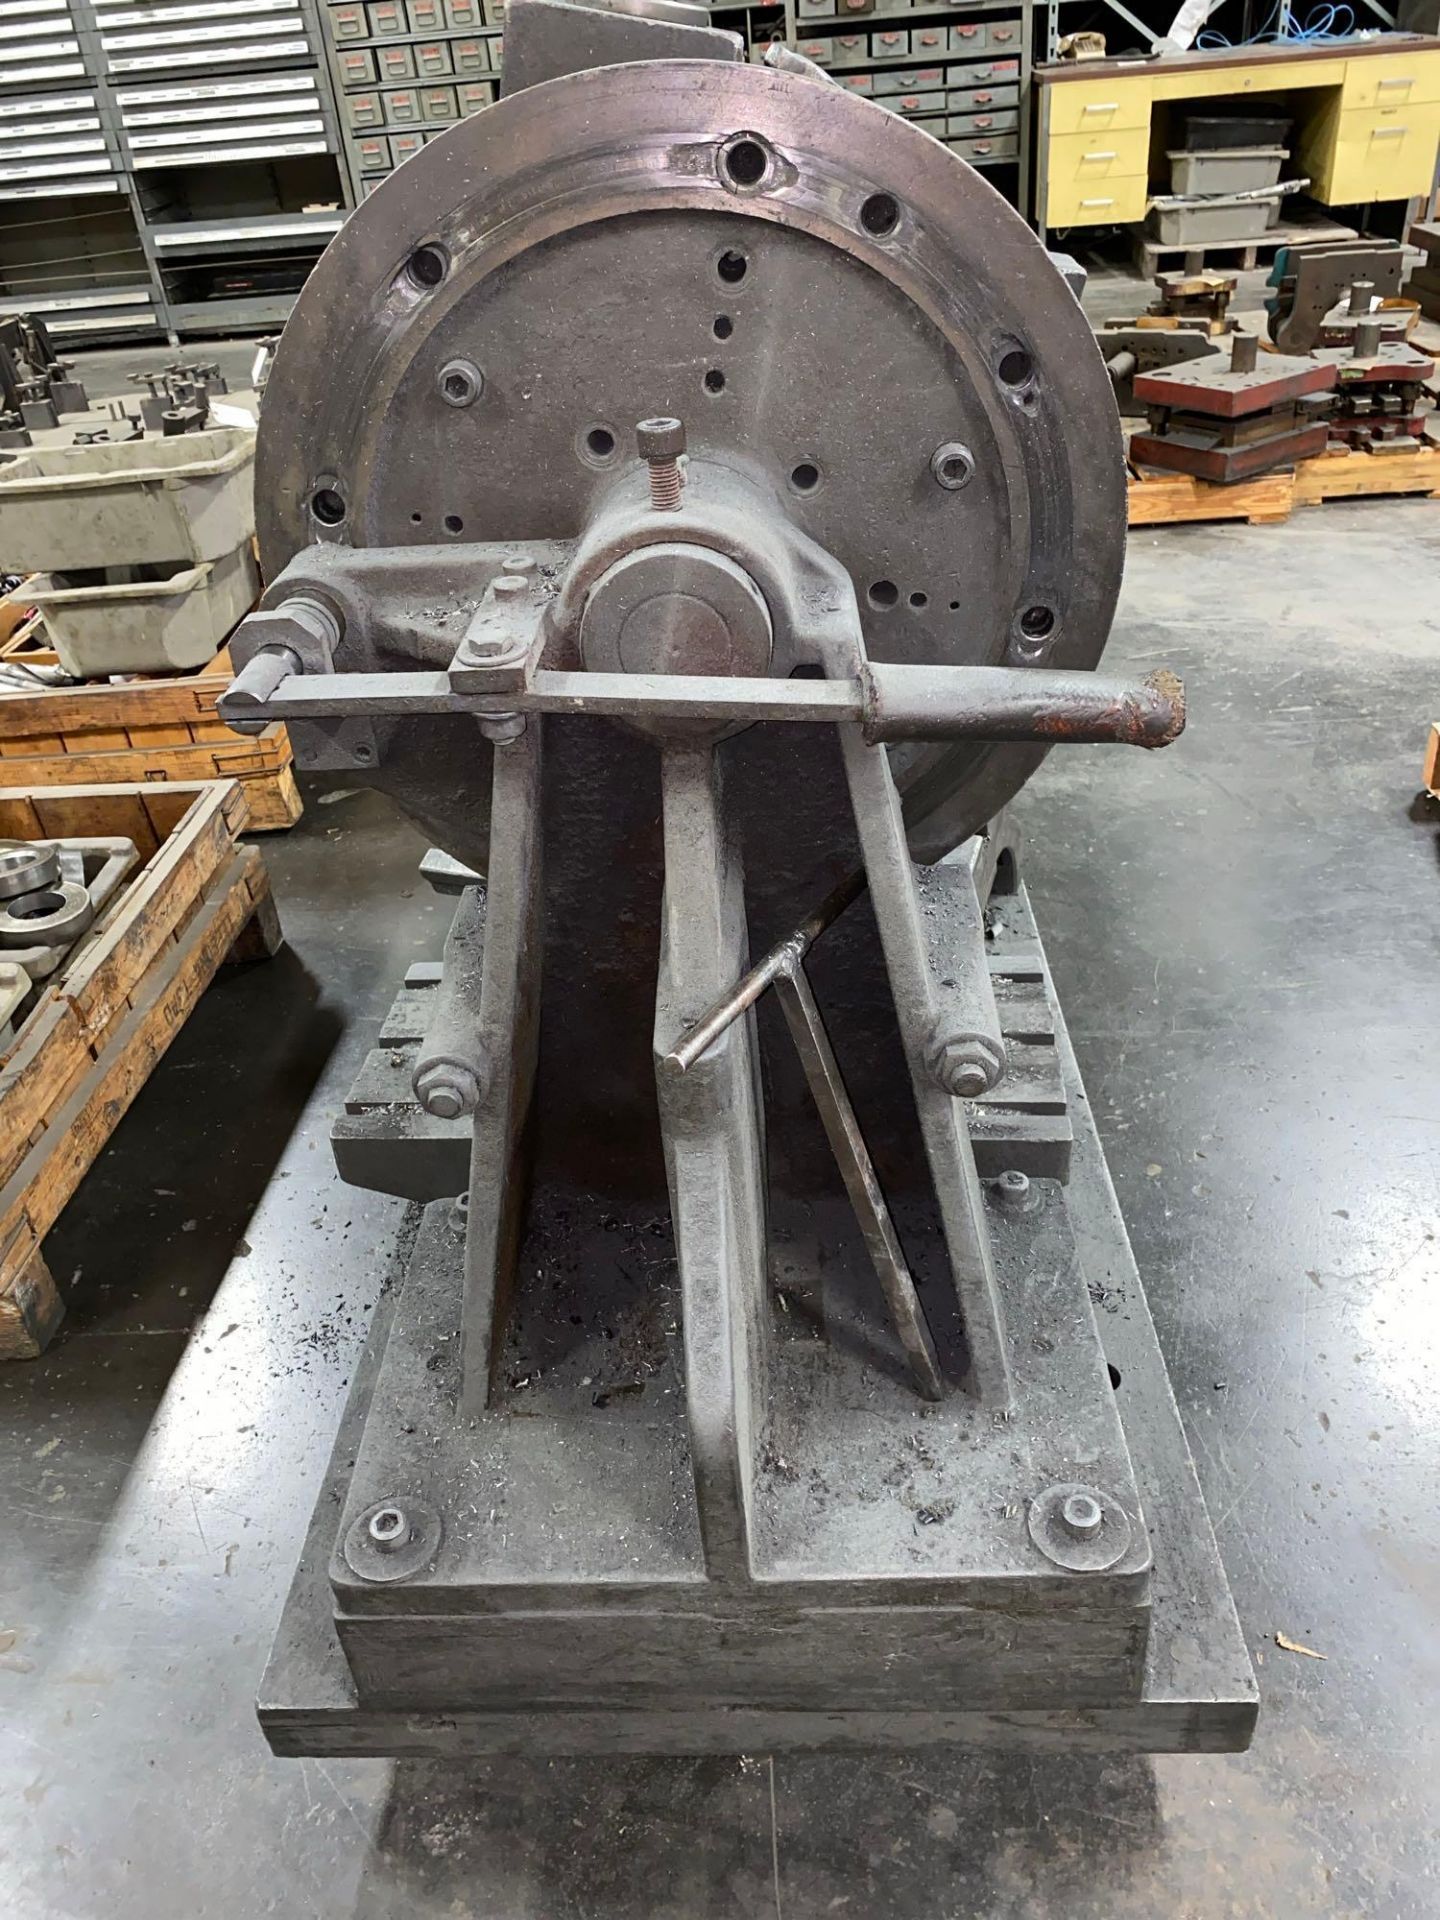 Cast Iron Spin Indexing Fixture w/ Tailstock Mounted on Base Plate - Image 6 of 7